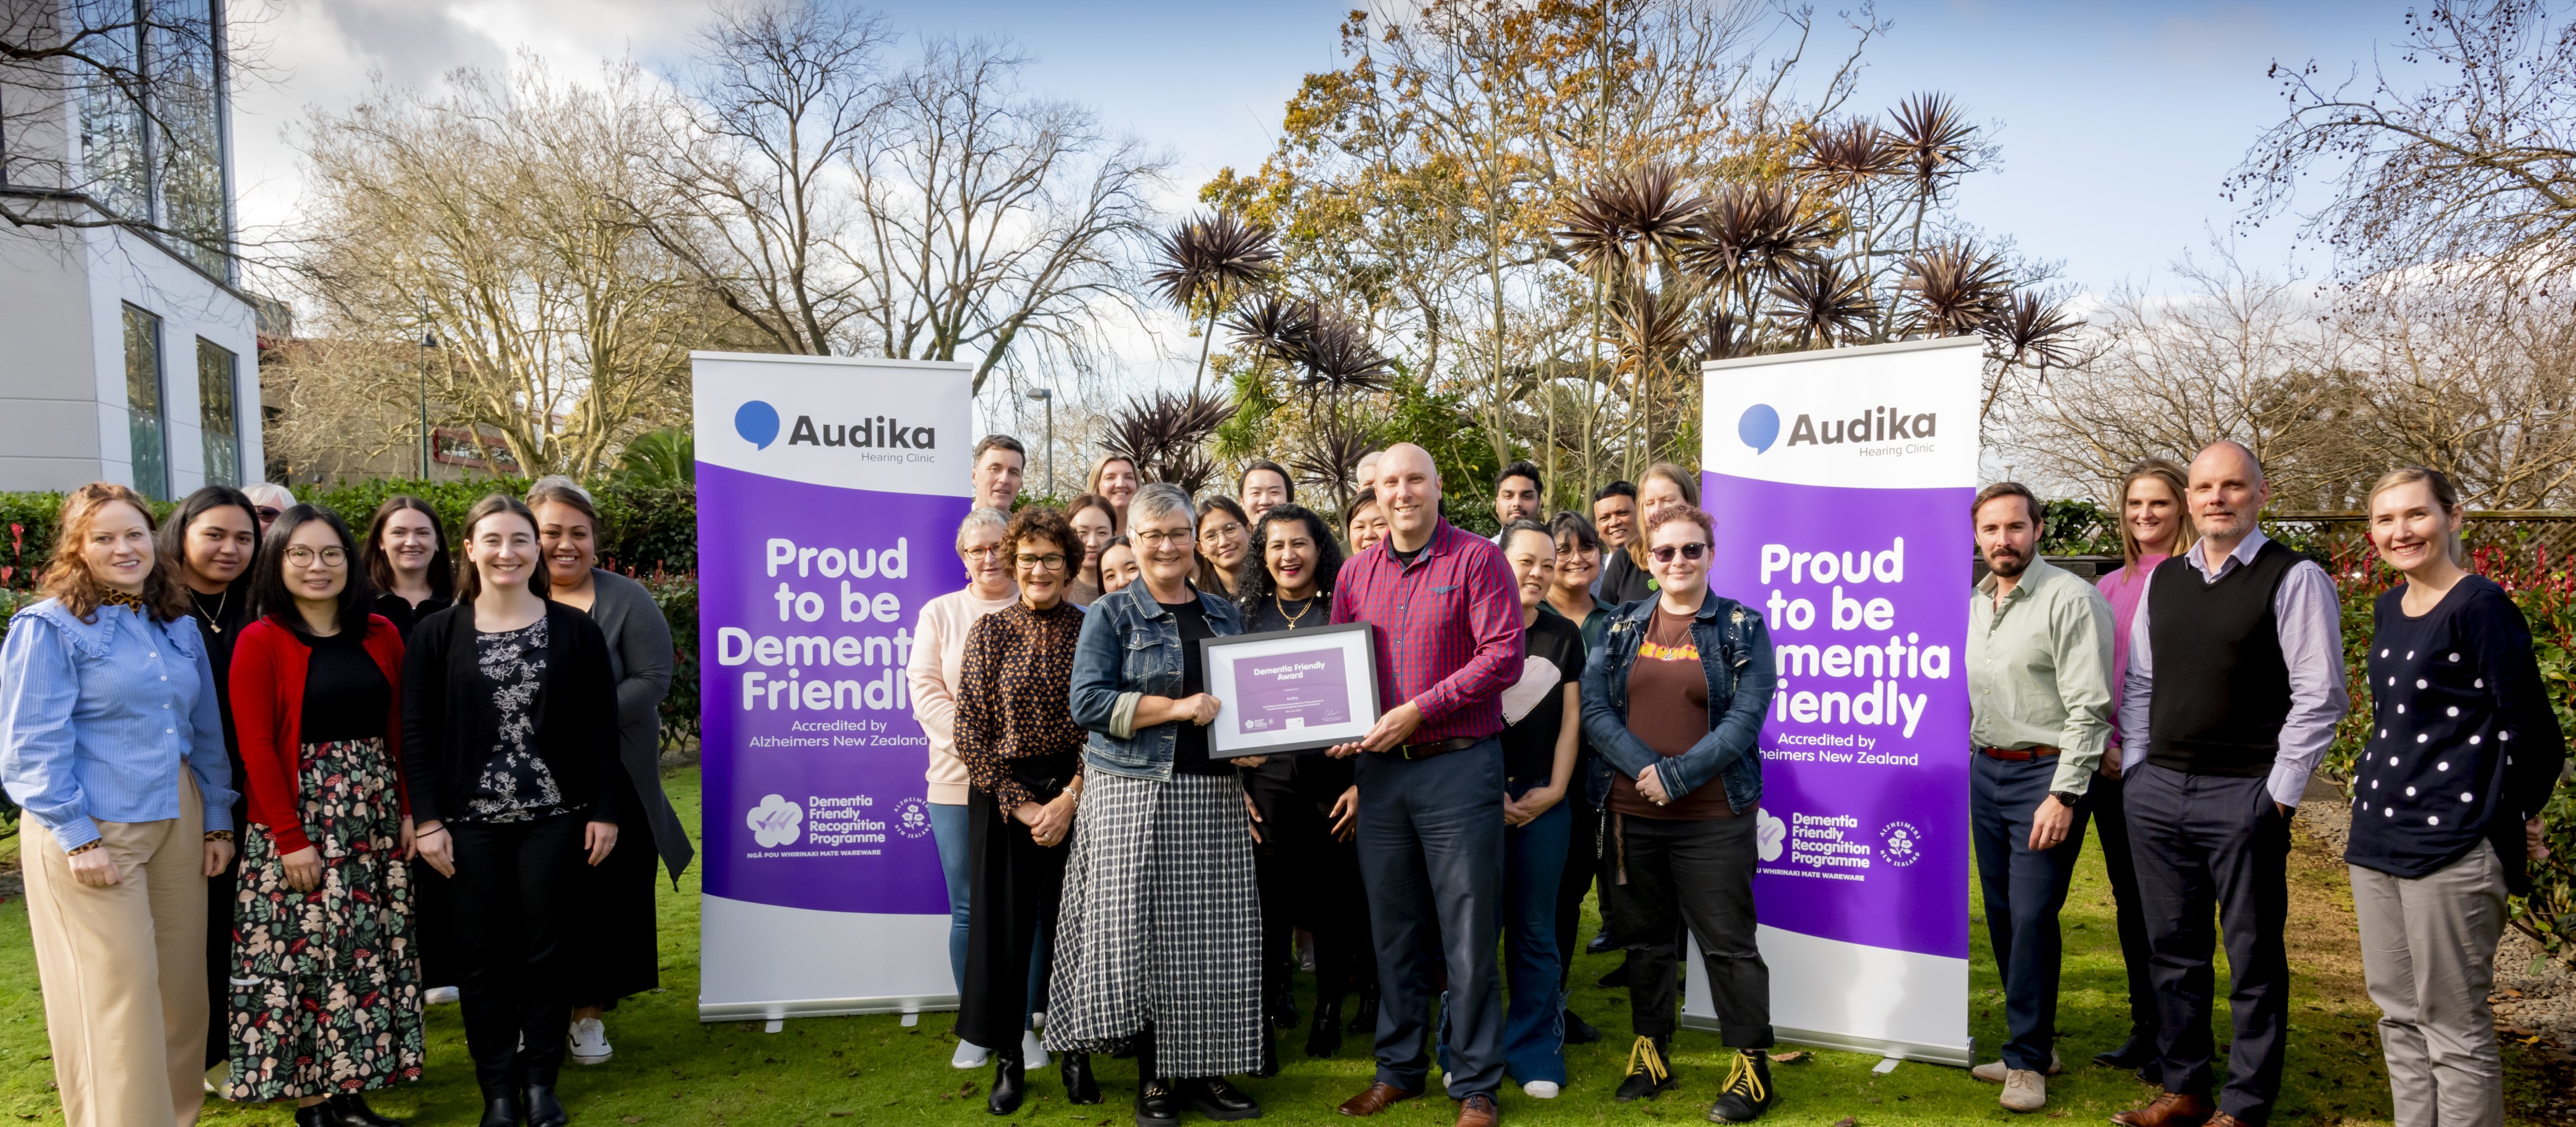 A group of people standing on lush grass, two in the middle holding up a framed certificate